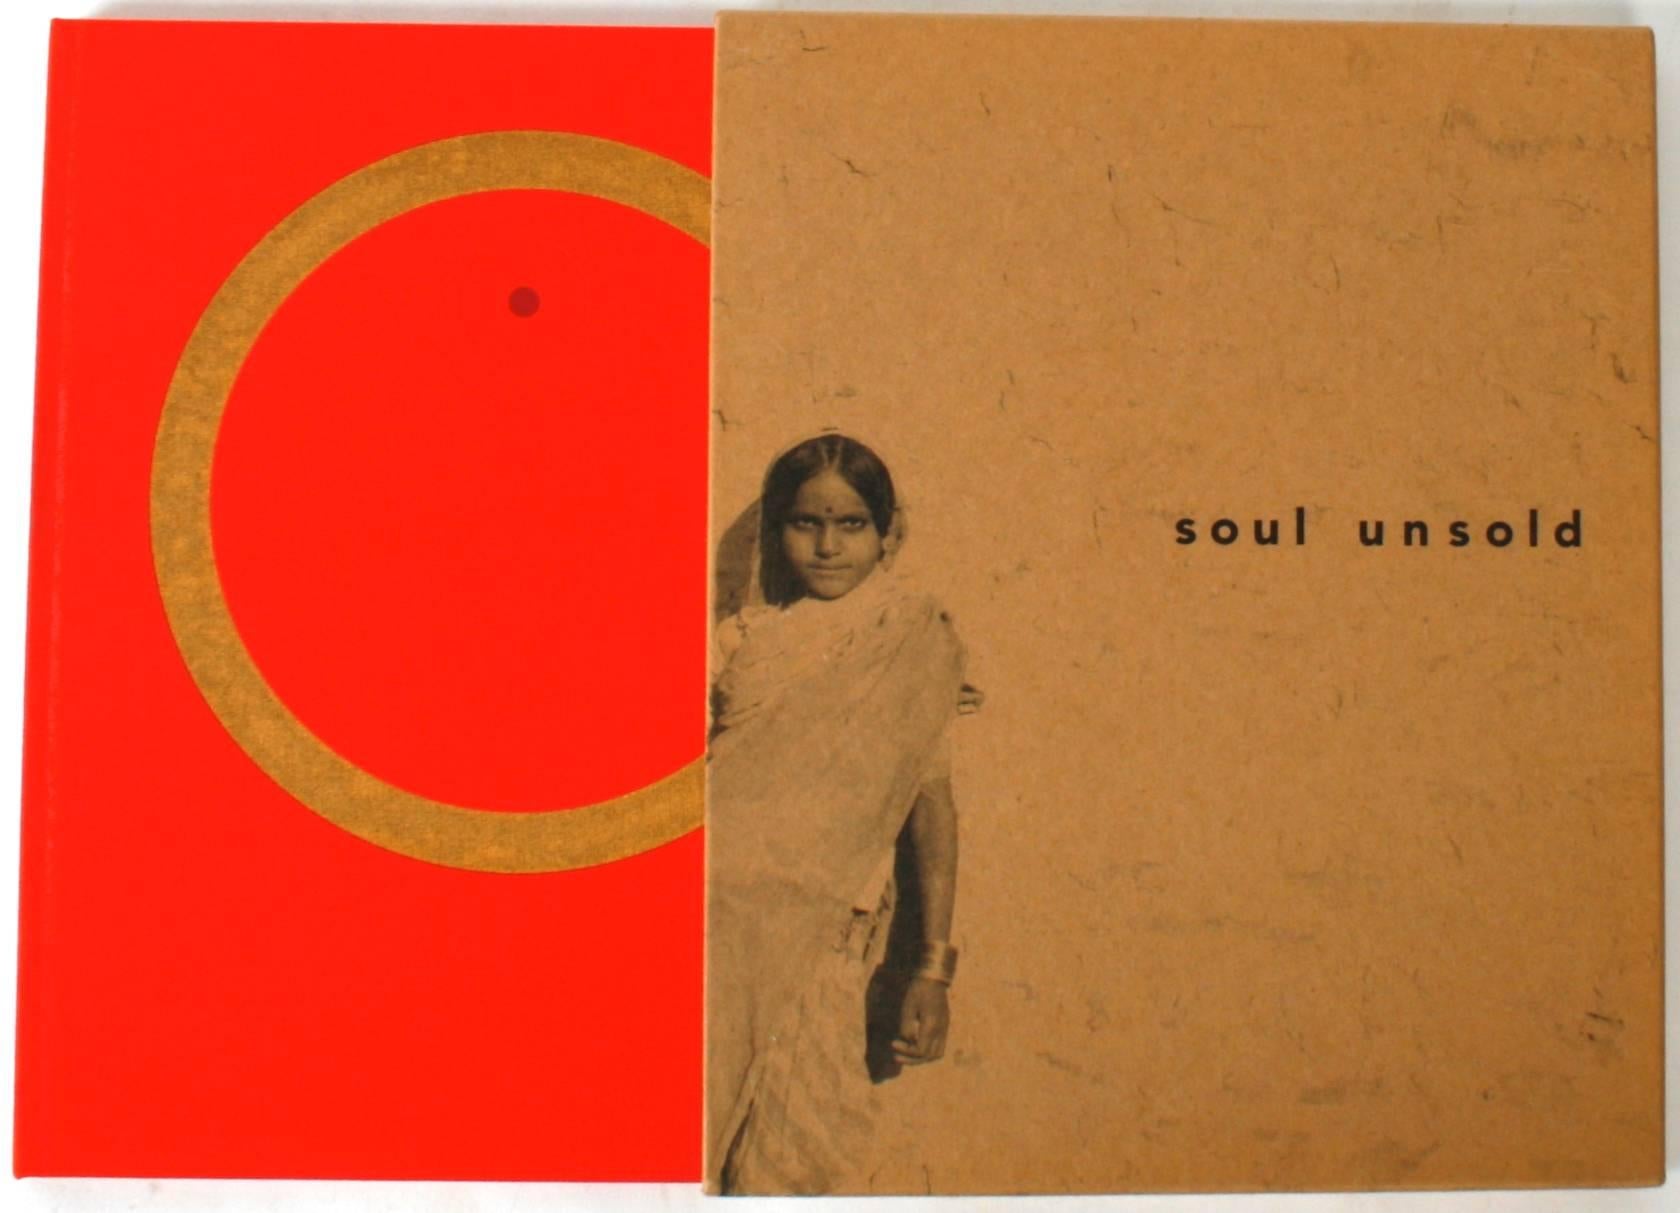 Soul Unsold by Mandy Vahabzadeh. Graystone Books, CA, 1992. Limited 1st Ed (1/5000) hardcover with slipcase. Black and white images taken in India. Handmade red Ginsheni endpages. Poems by Chitra Neogy-Tezak. Presents the first collection of work by